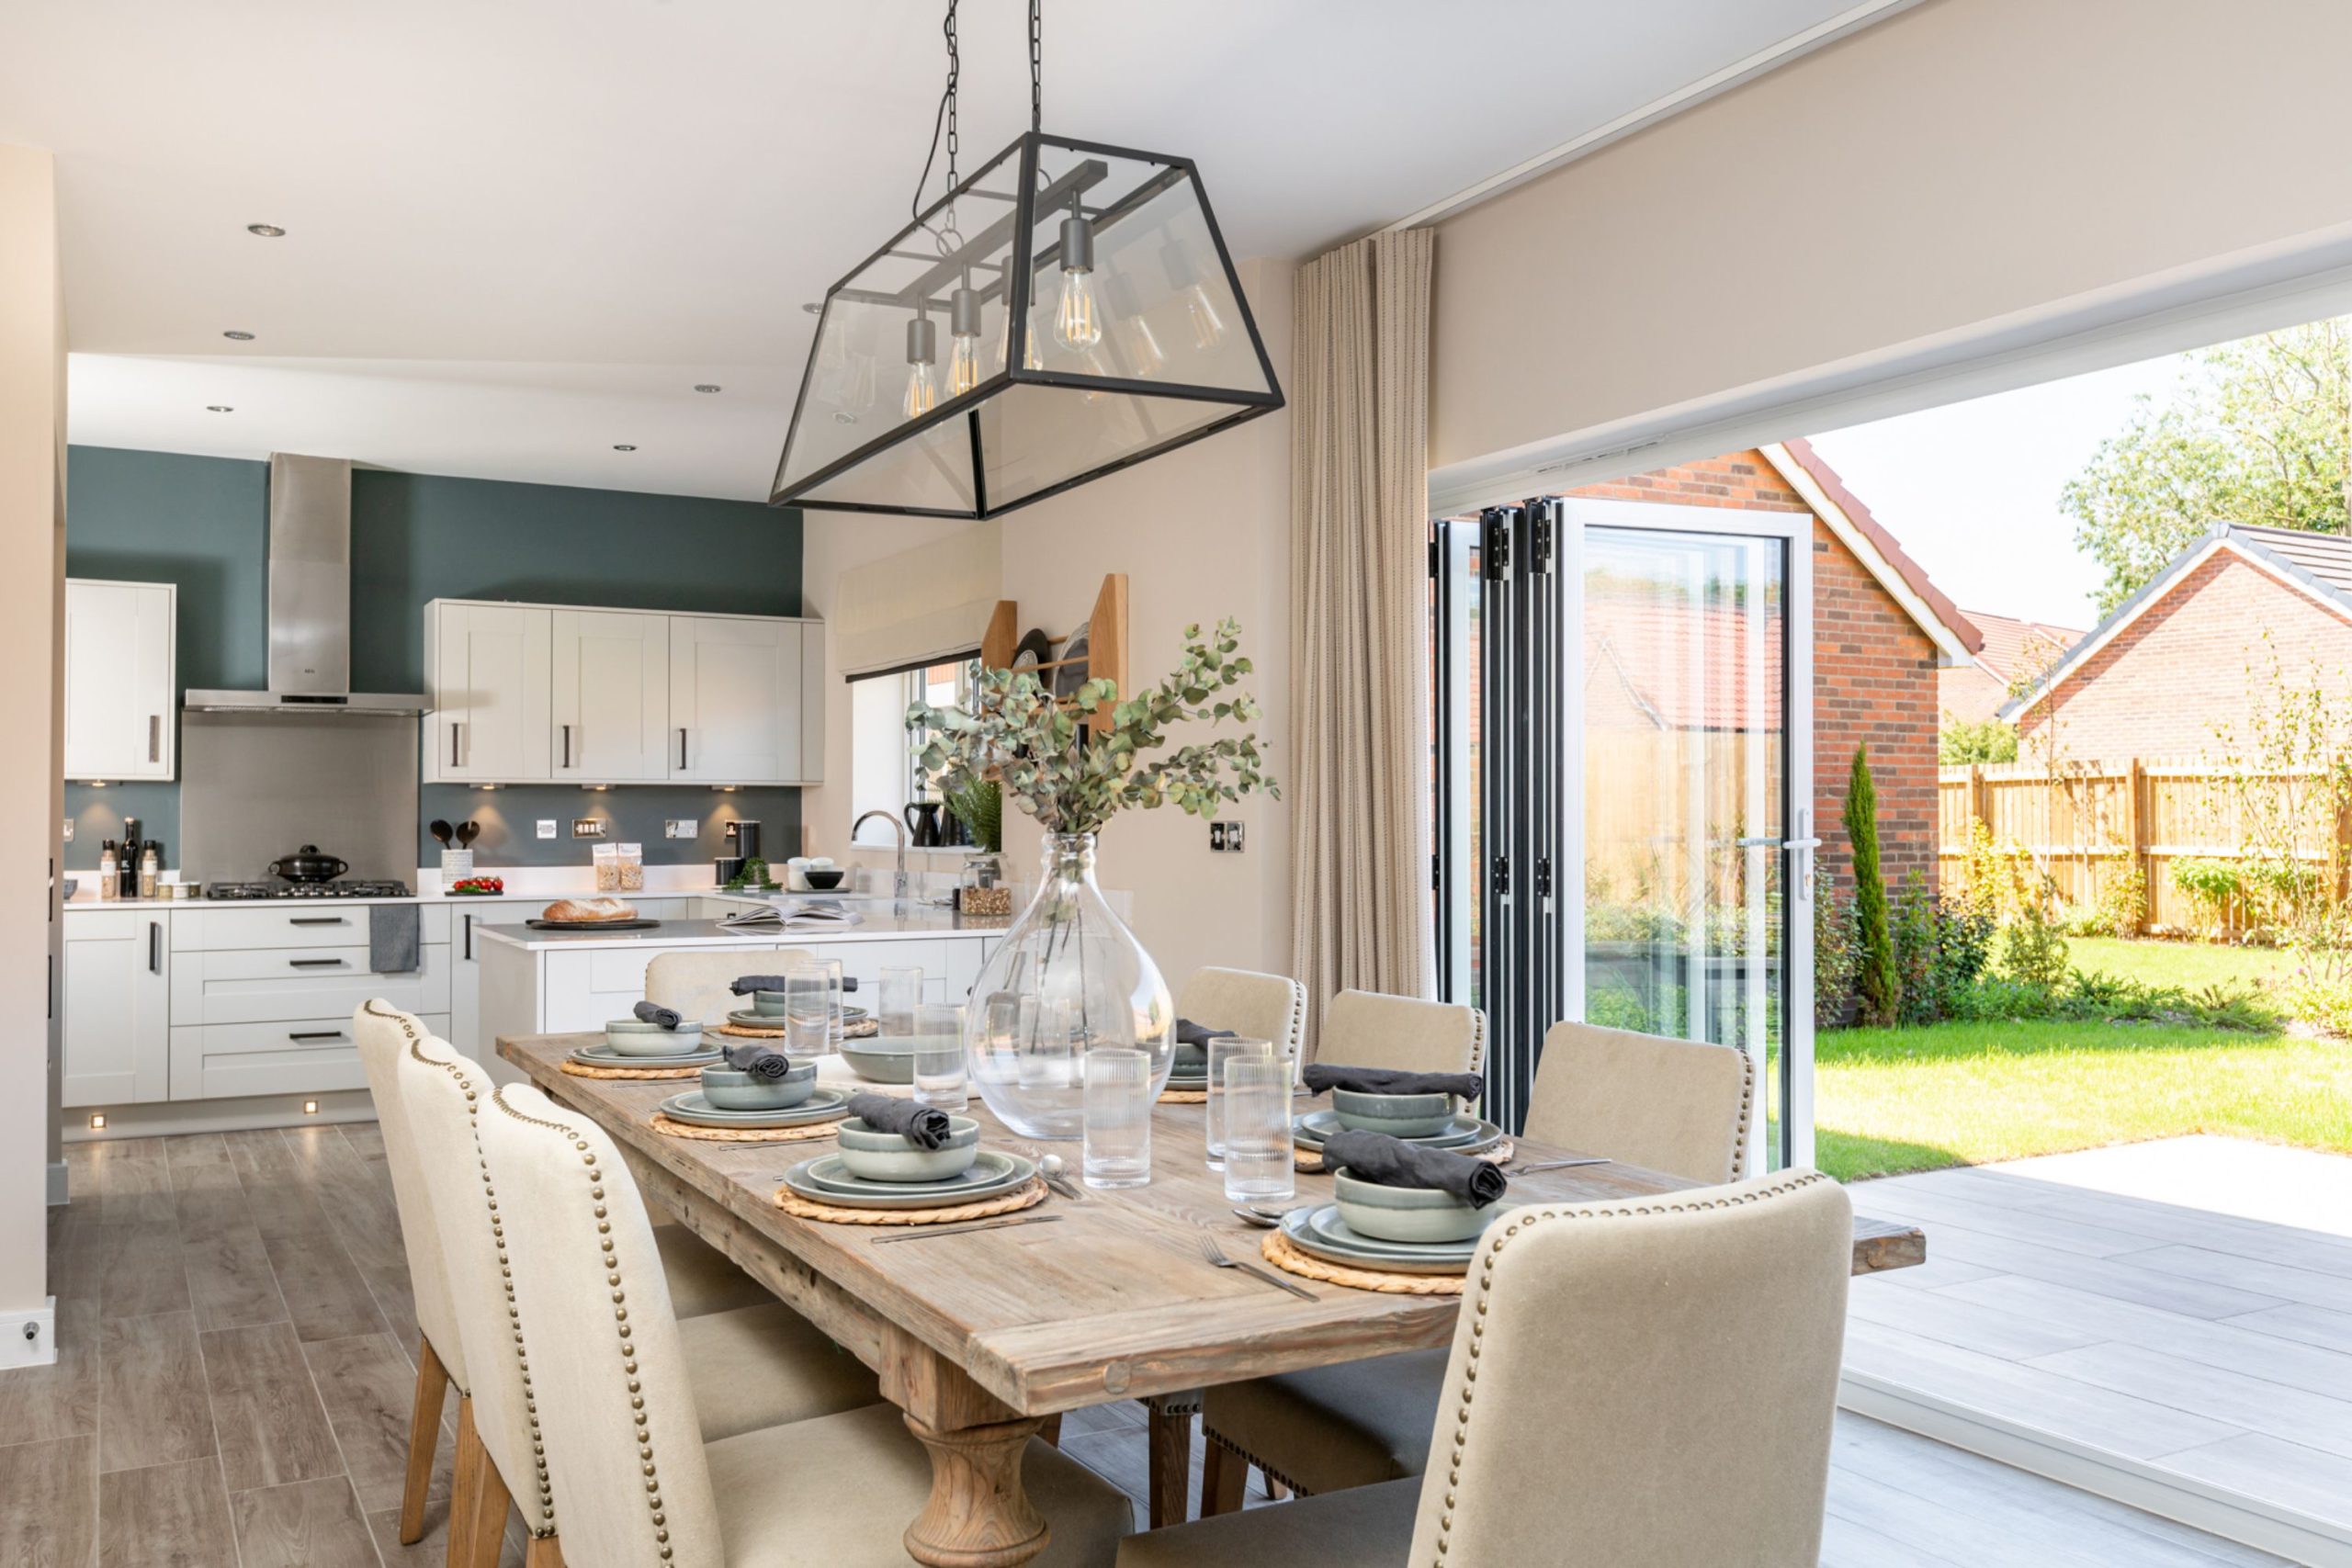 First Homes at New Development in Hempsted Go on Sale